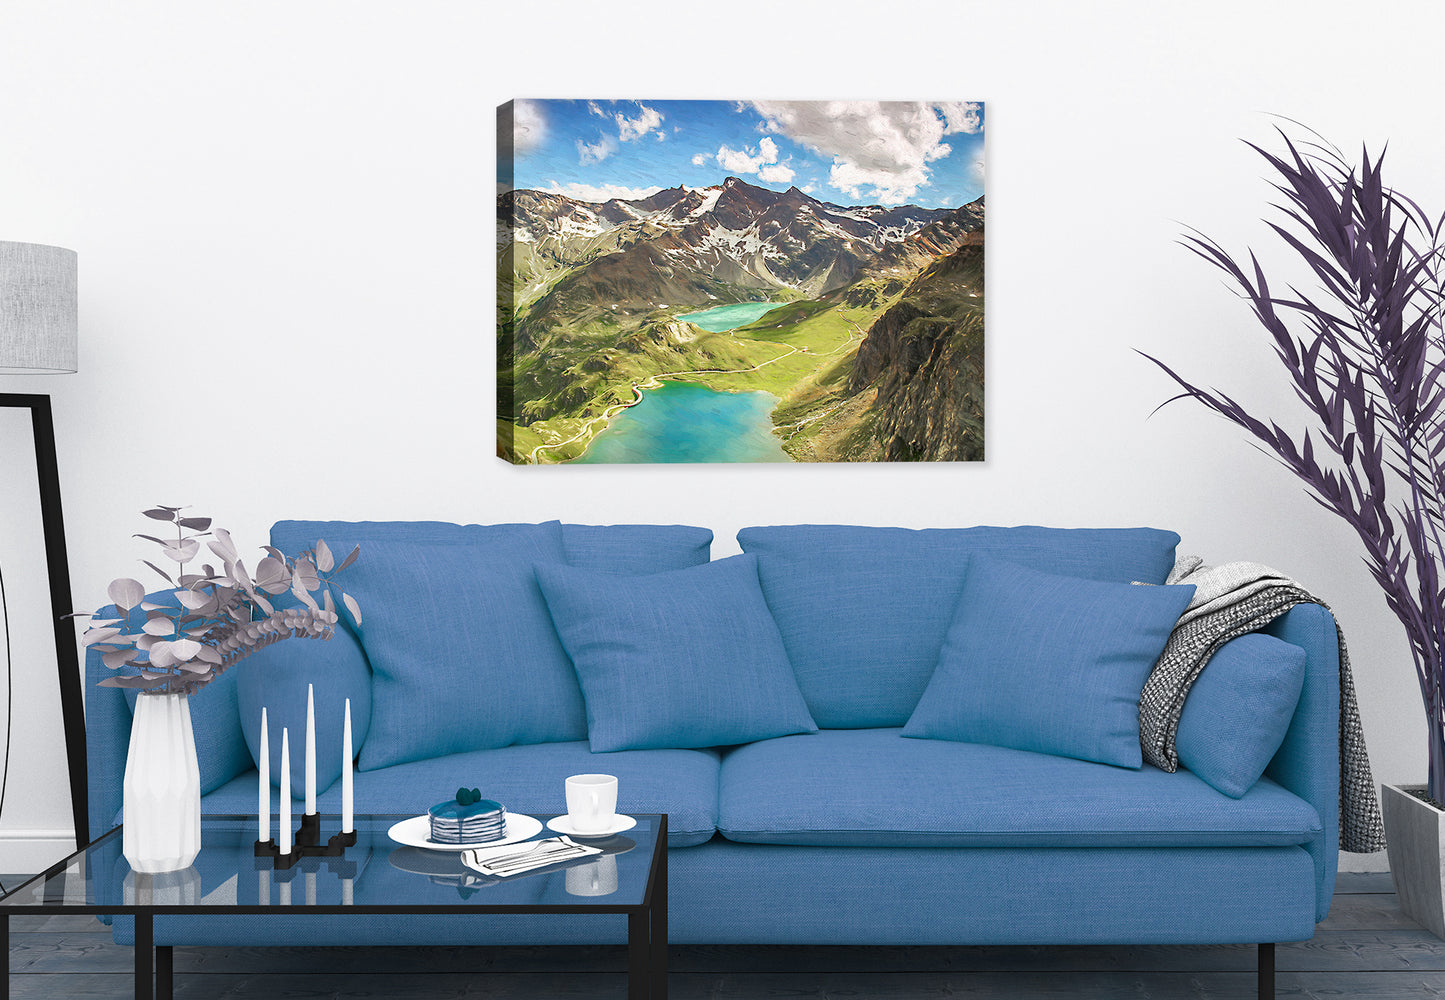 A Walk in the Clouds (Alps) - Canvas Art Painting